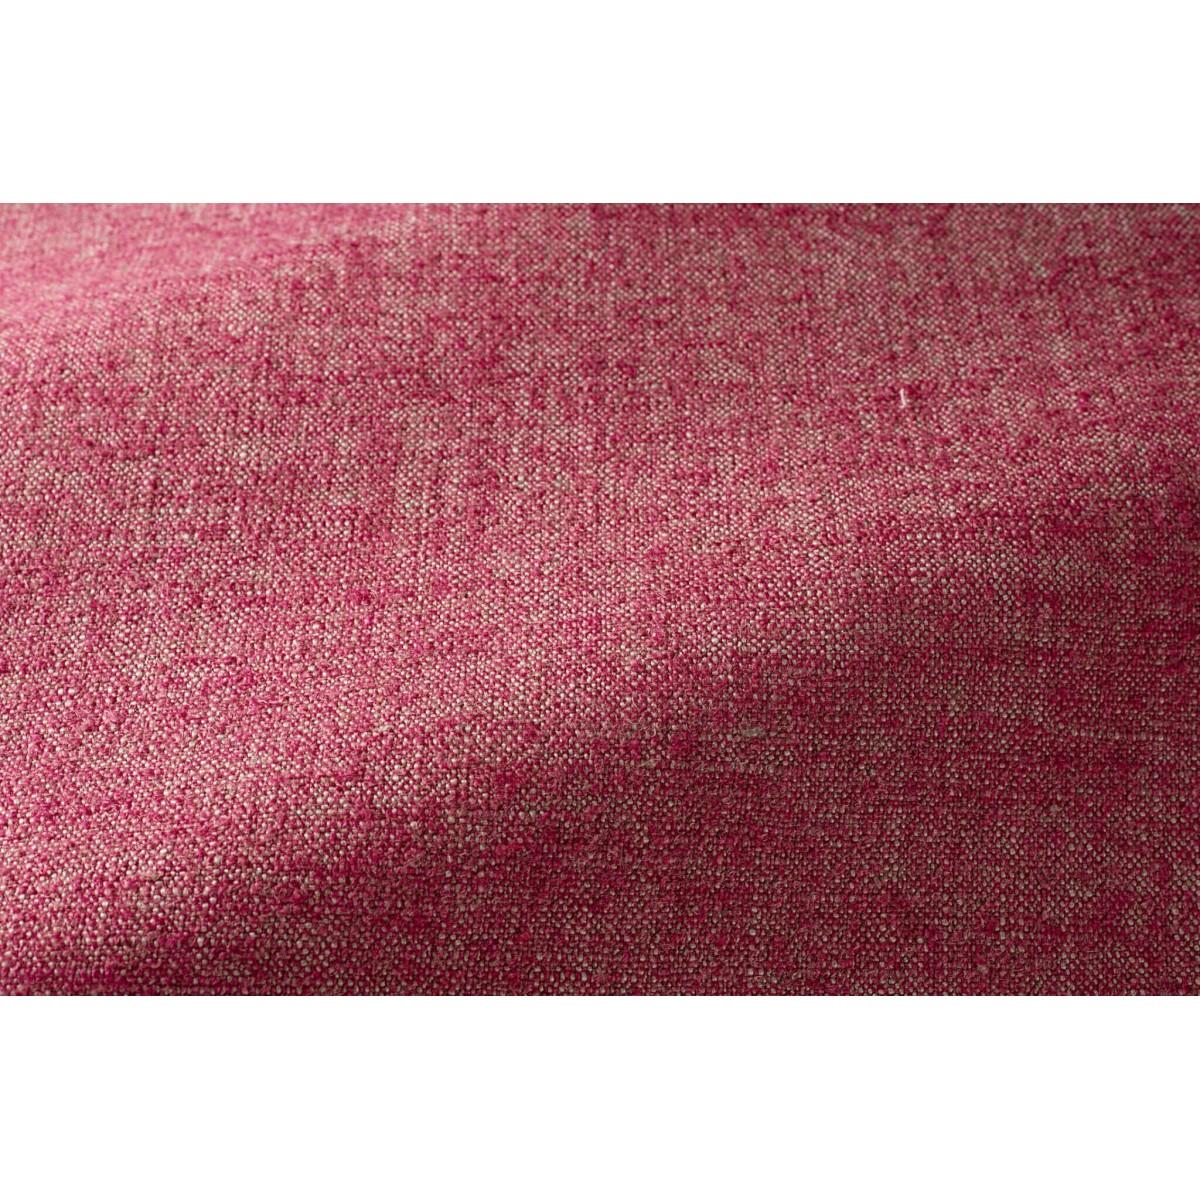 Popus Editions Graziella 4 Seater Sofa in Fuschia London Linen Fabric

A foot that hides another. A cushion that hides another. A curve that hides another with contemporary lines and a base like a punctuation mark, this sofa gives pride of place